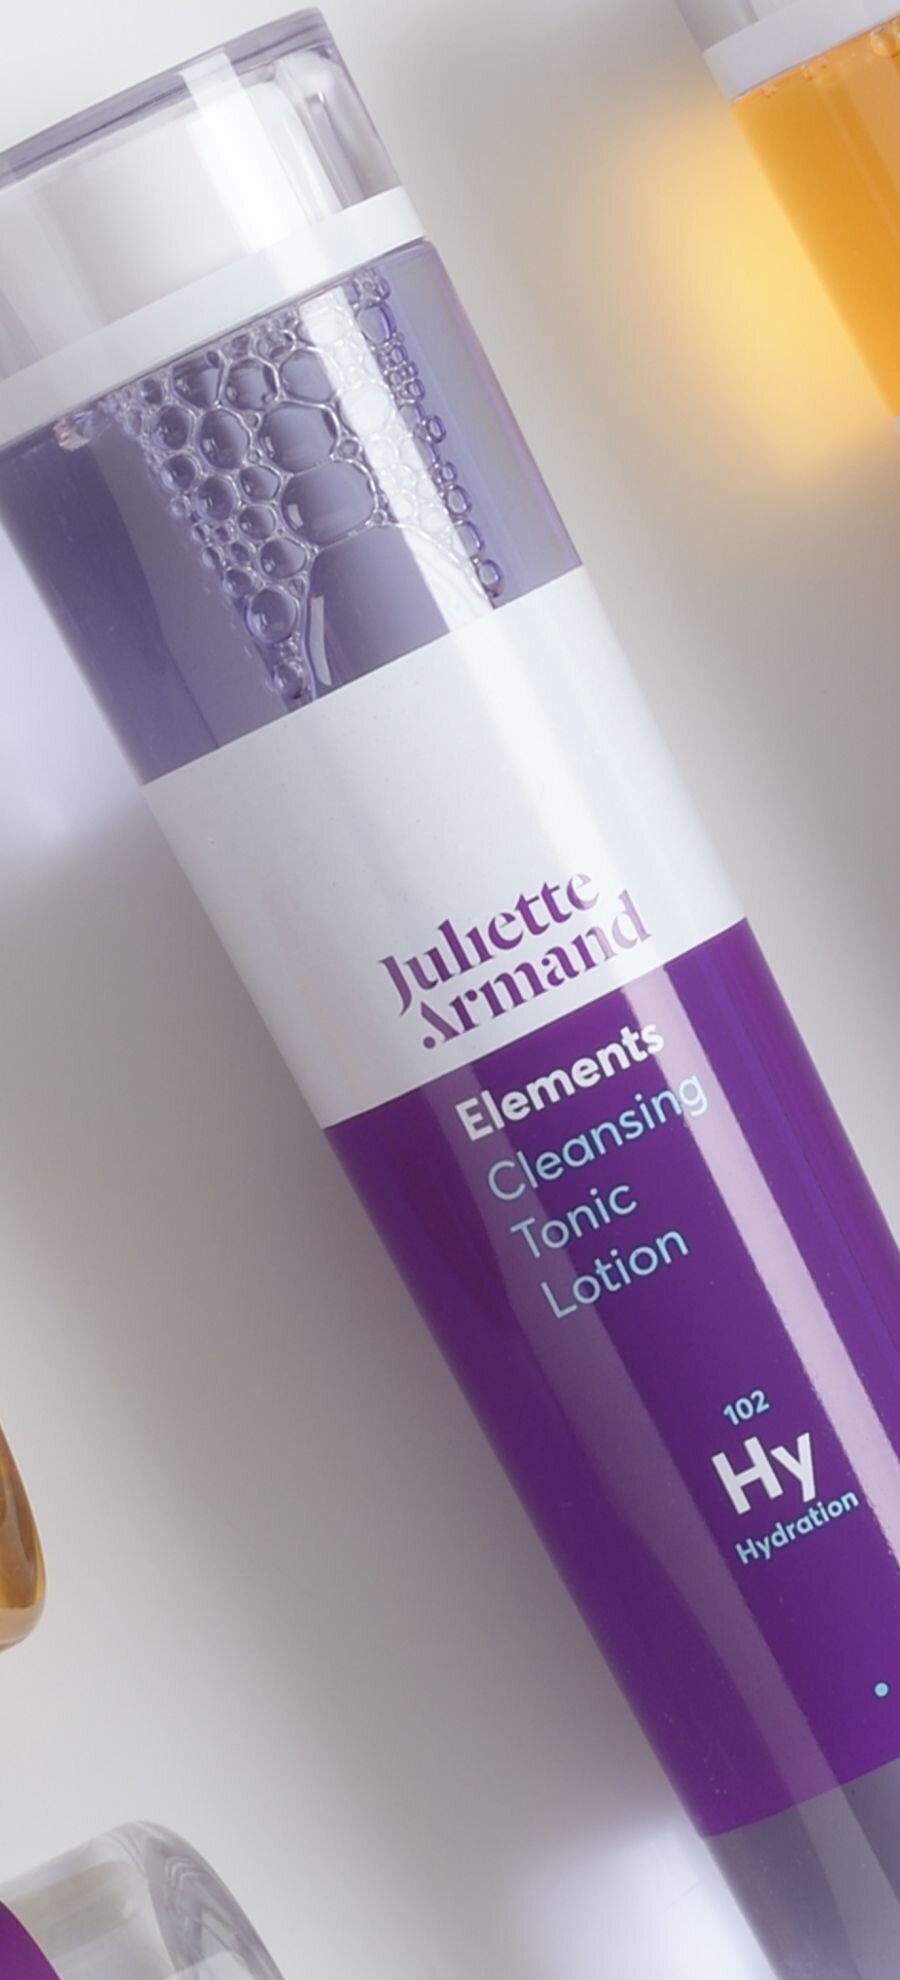 juliette armand cleansing tonic lotion